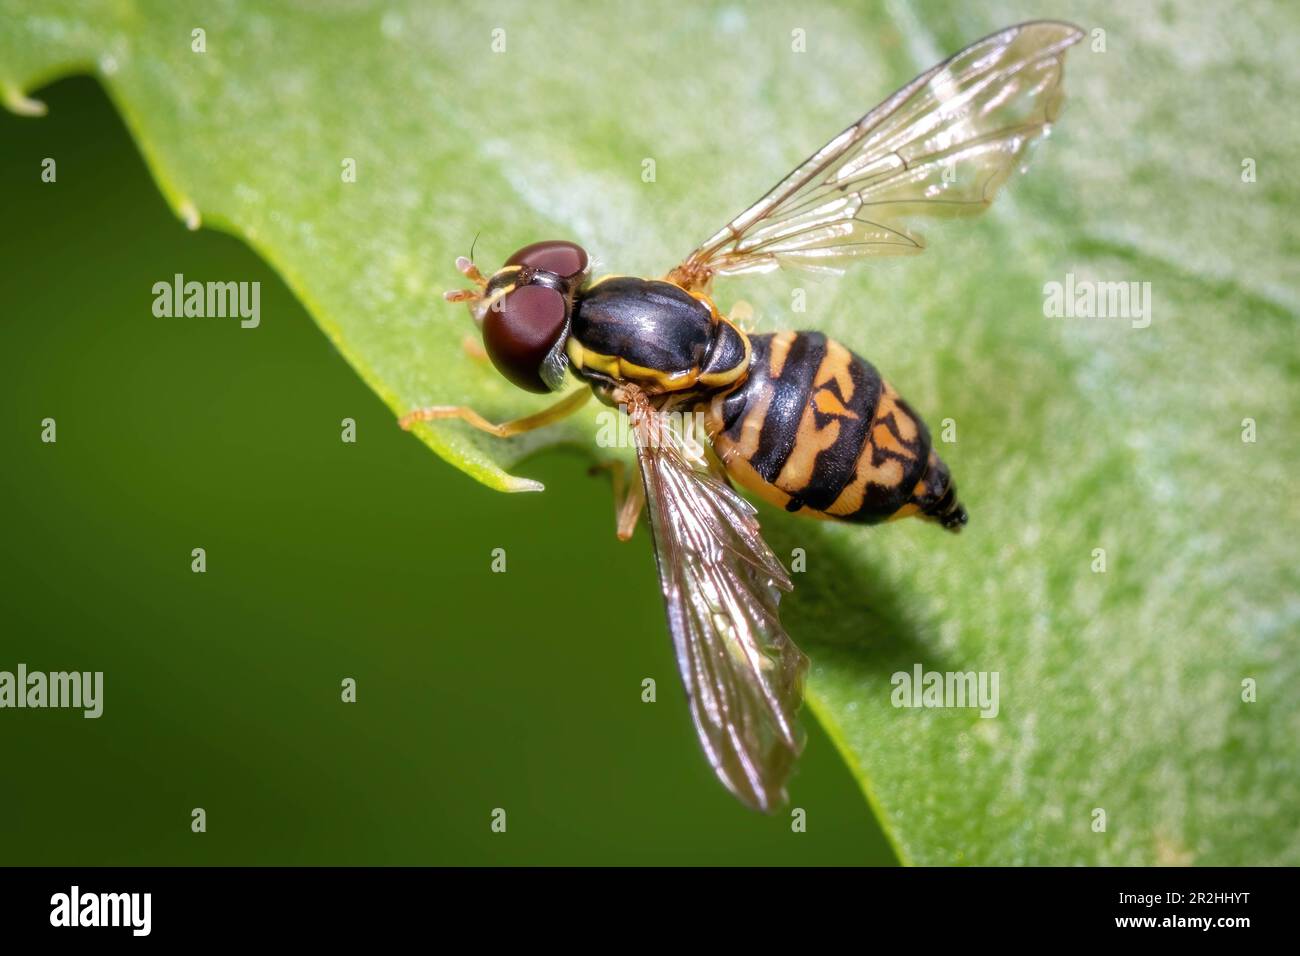 A female Eastern Calligrapher (Toxomerus geminatus), or flower fly, rests on a leaf. Raleigh, North Carolina. Stock Photo